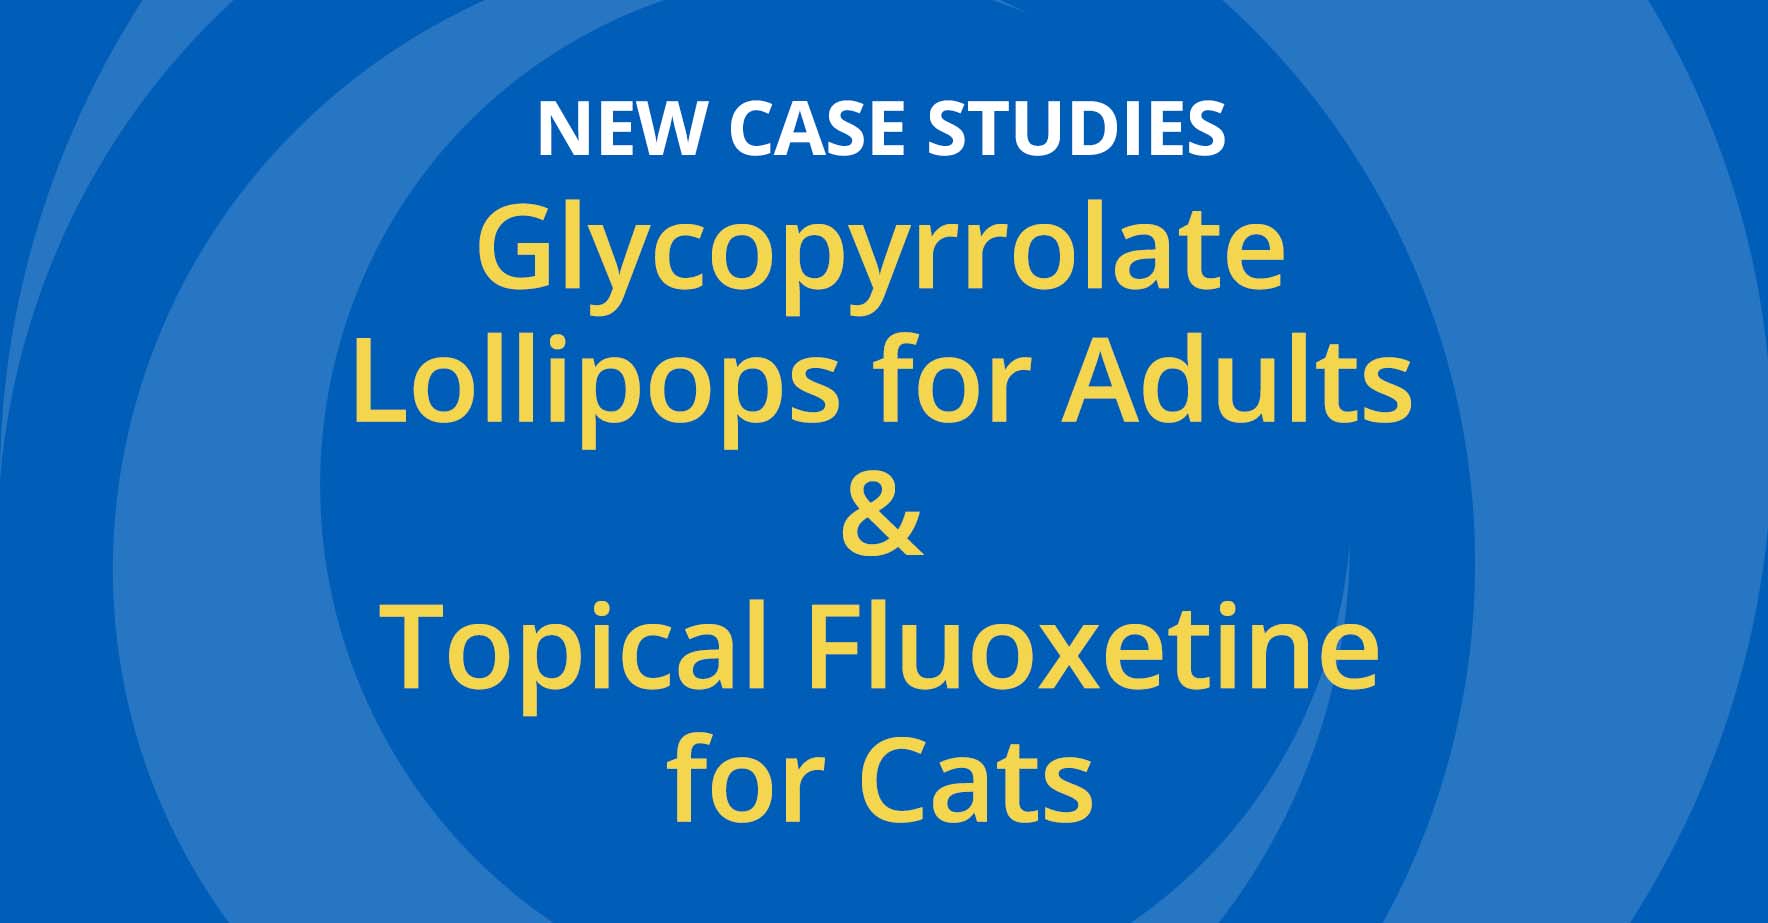 glycopyrrate_lollipops_for_adults_and_topical_fluoxetine_for_cats_new_case_studies.jpg